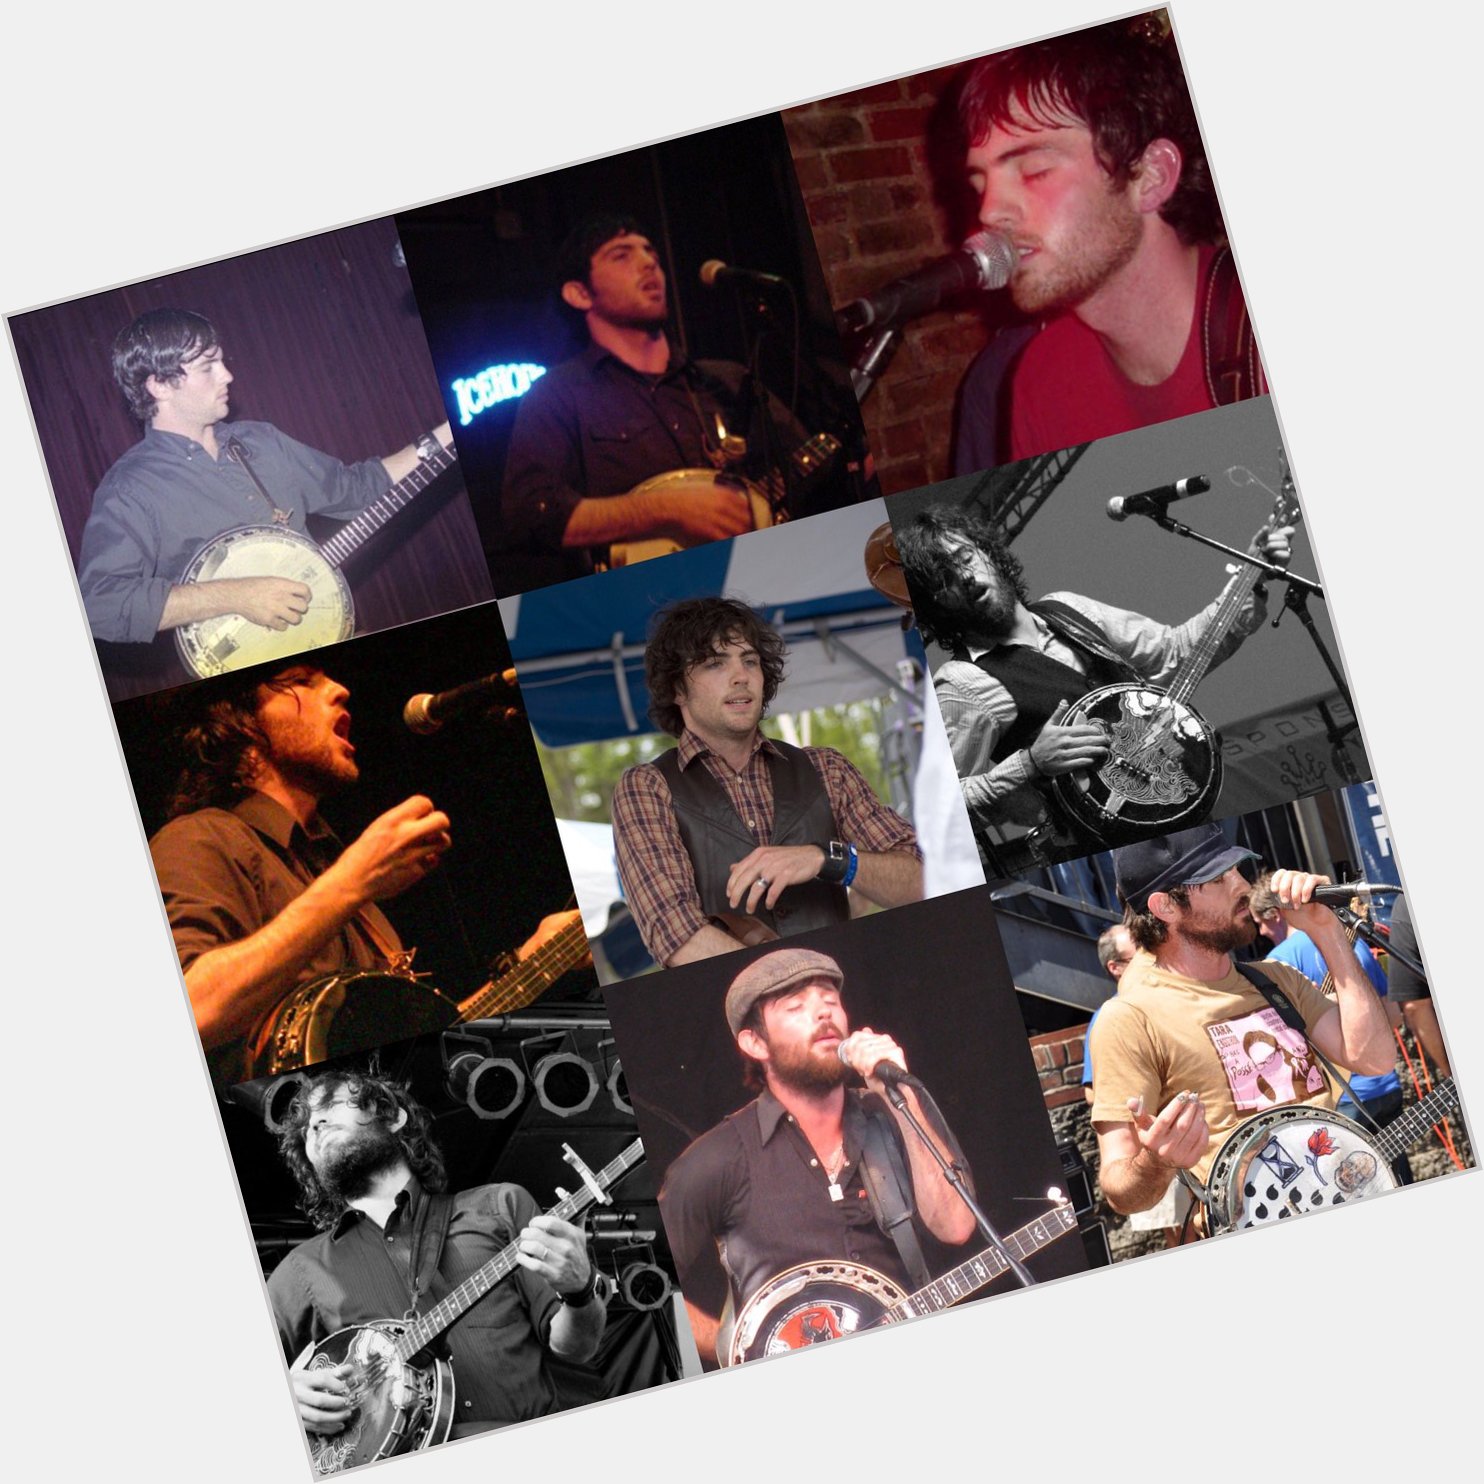 Happy Birthday to Scott Avett! Here is a pictures from each year of 2001-2019 